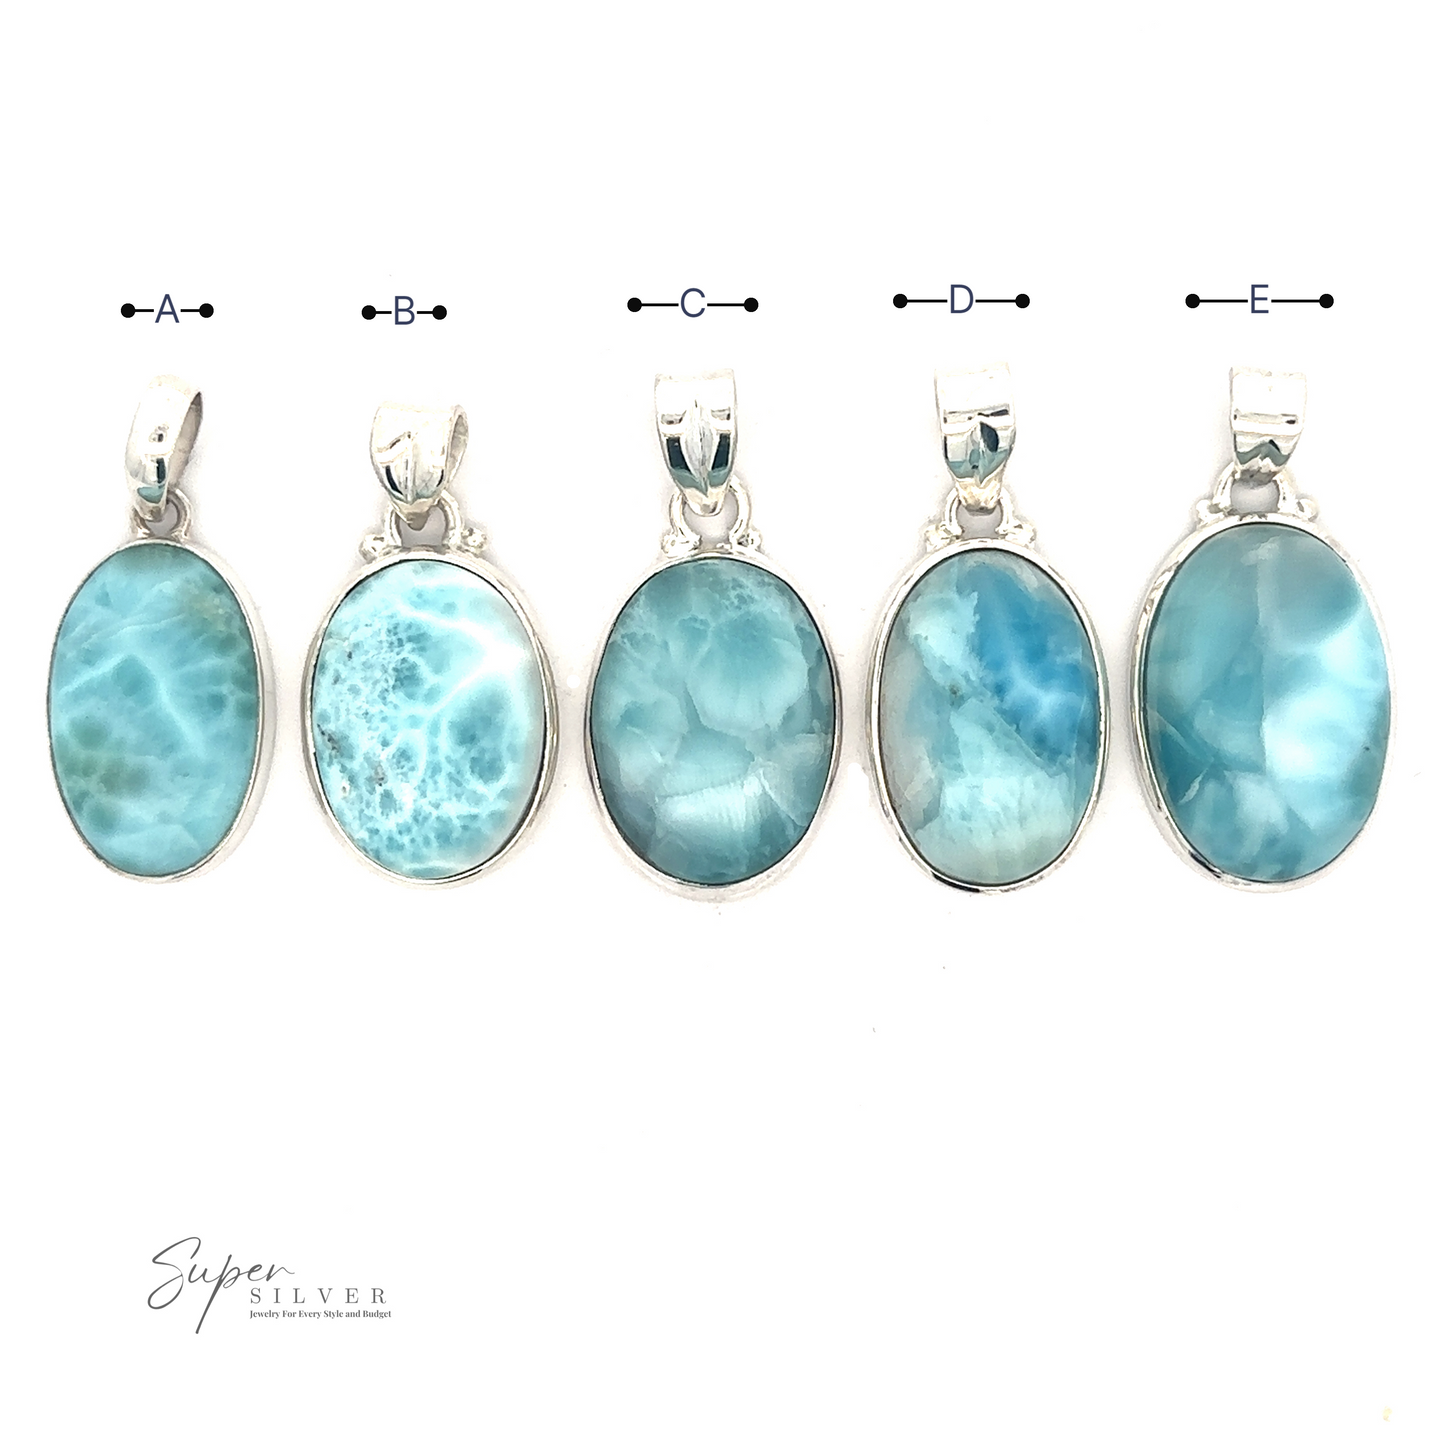 Five Small Oval Larimar Pendants, labeled A to E, are displayed in a row. Each pendant features a unique pattern and shade of blue, perfect for everyday wear.